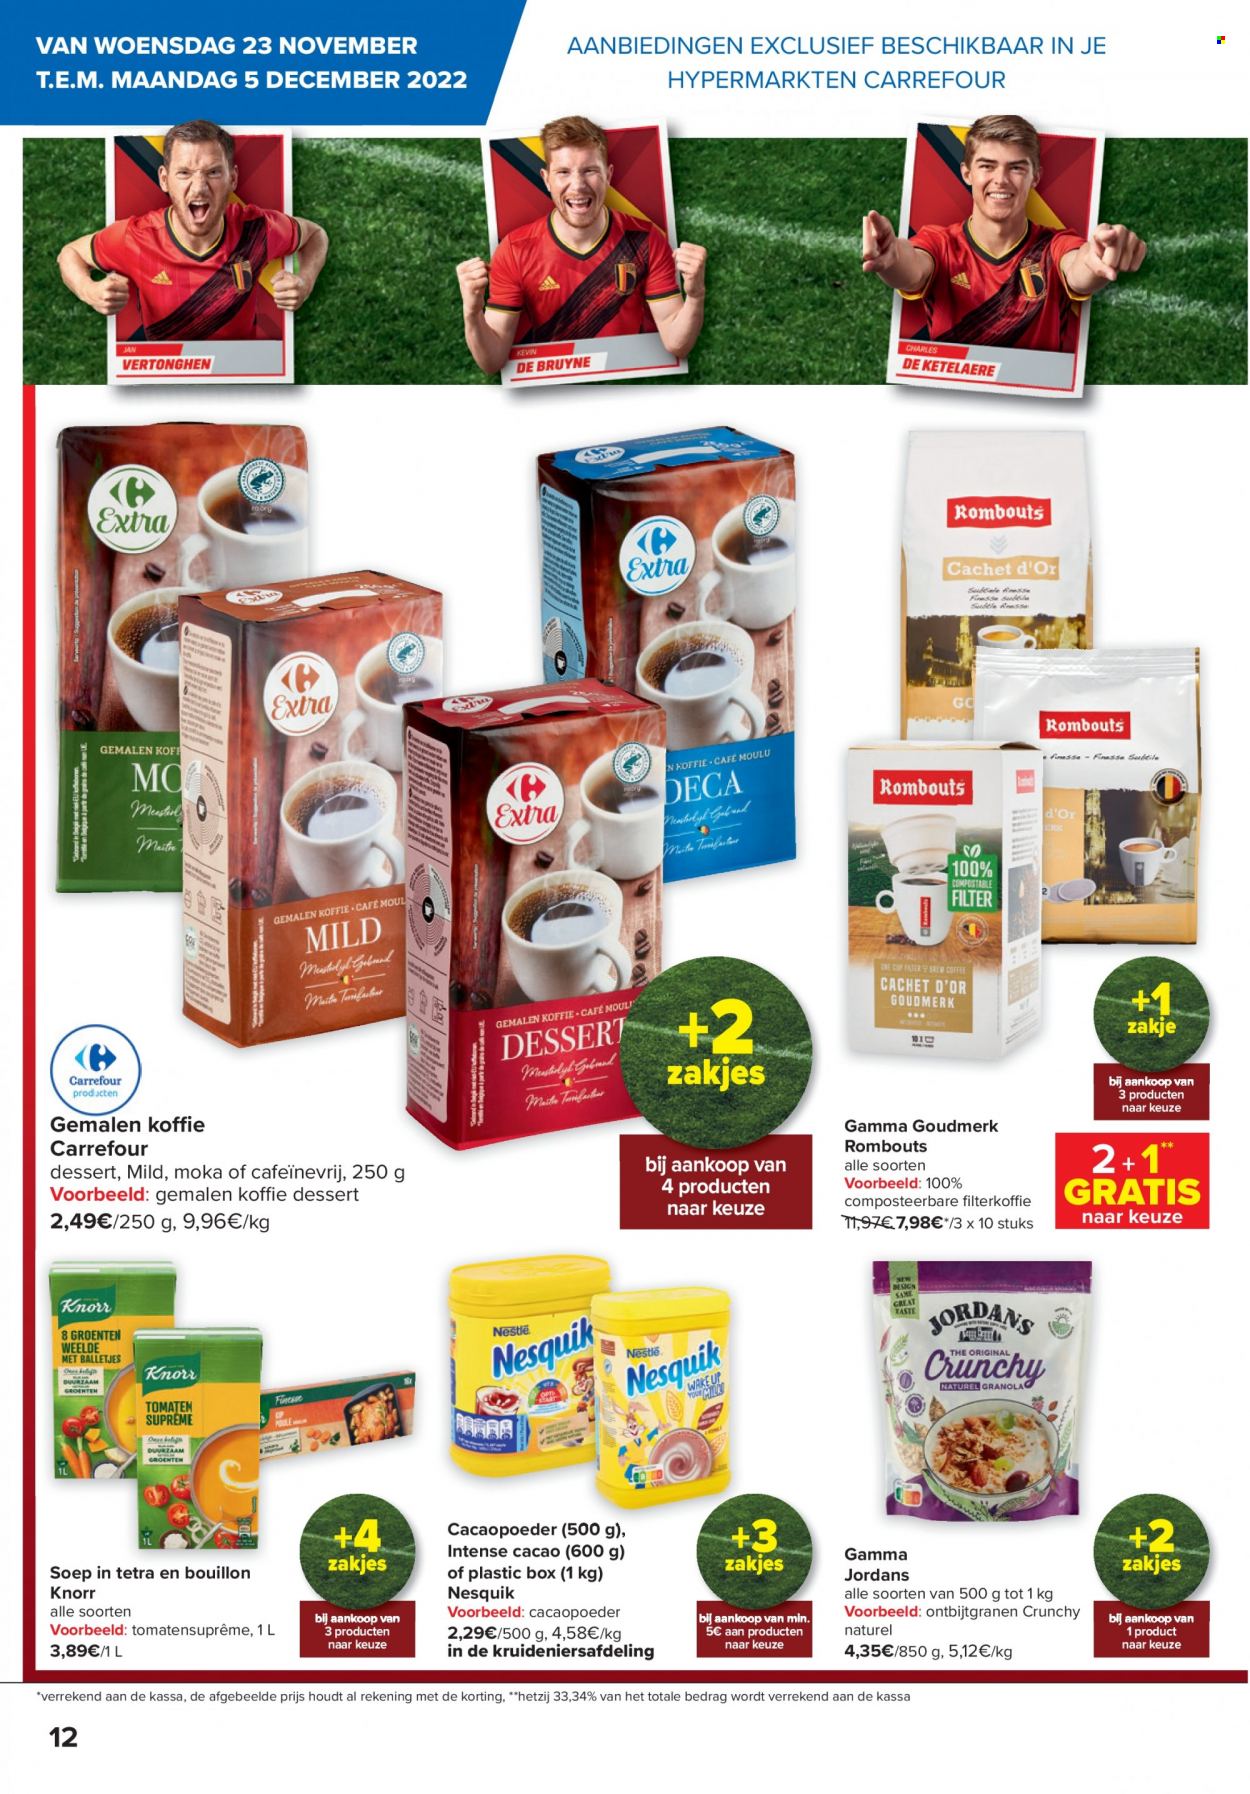 Catalogue Carrefour hypermarkt - 23.11.2022 - 5.12.2022. Page 12.